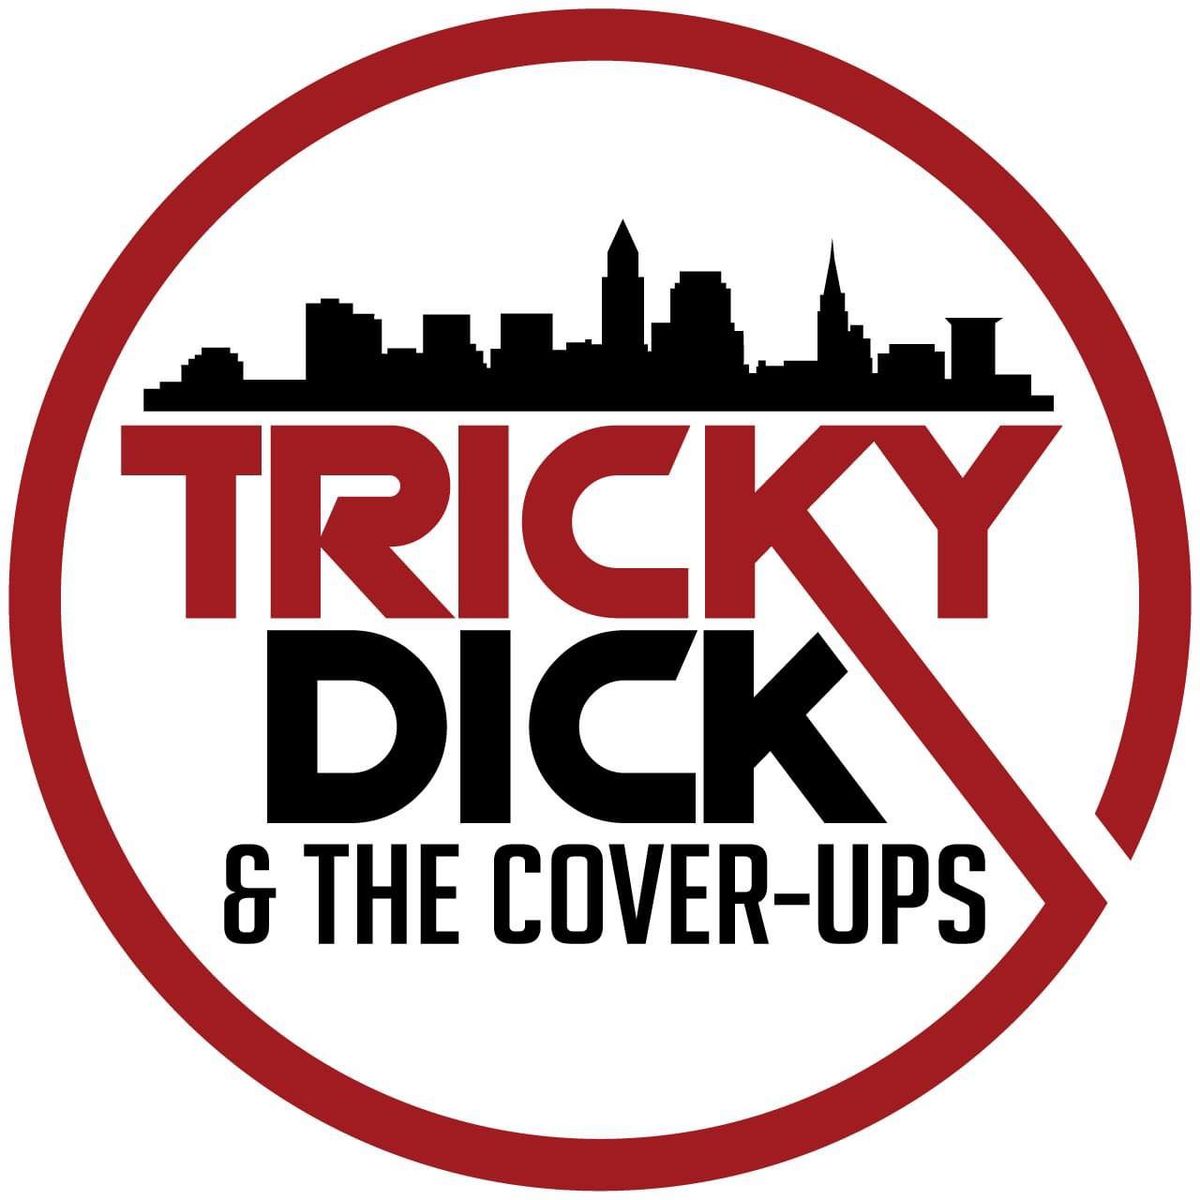 Summer Concert - TRICKY DICK & THE COVER-UPS